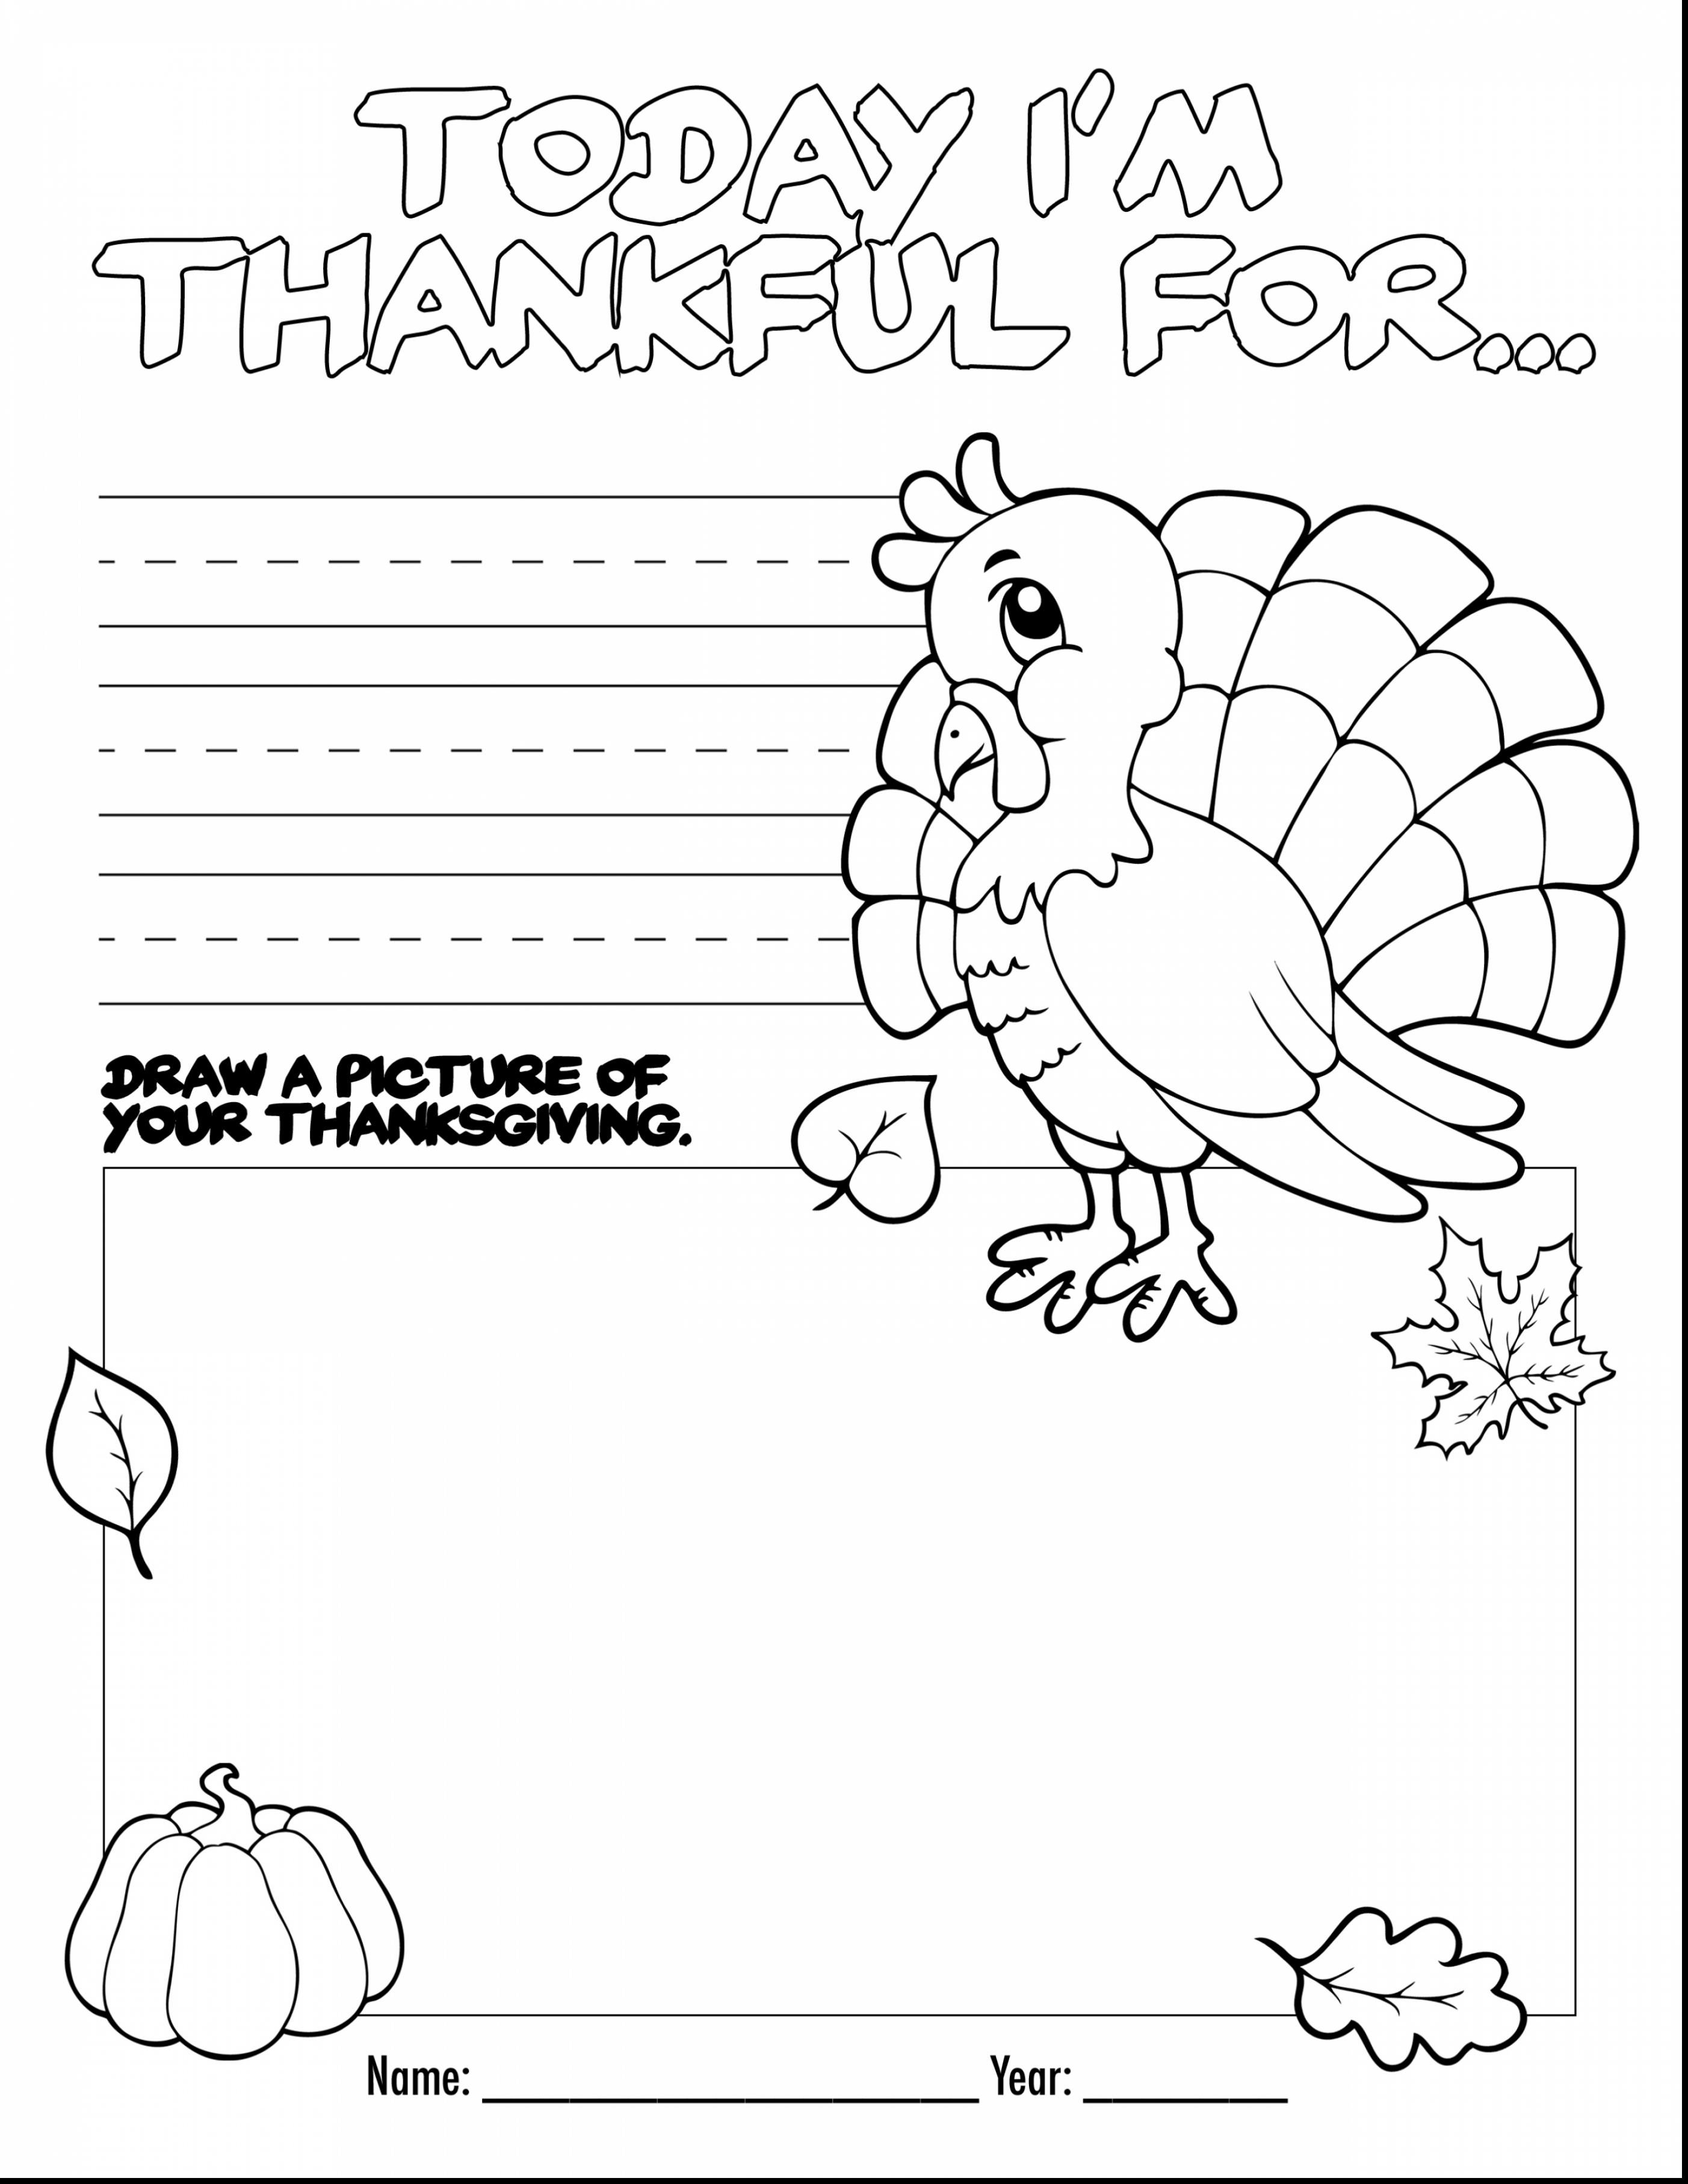 Printable Thanksgiving Coloring Pages at GetColorings.com | Free